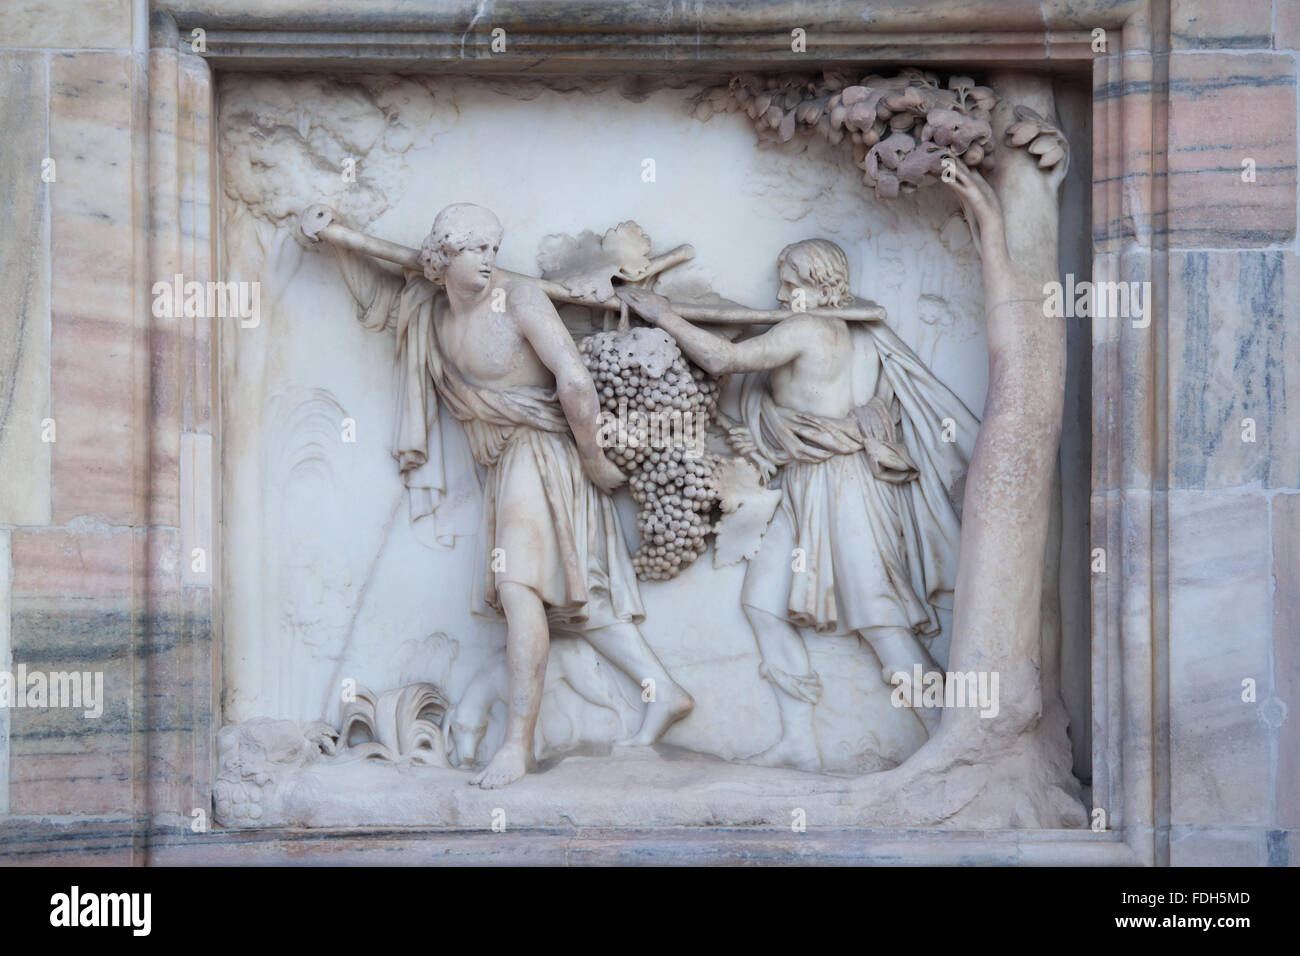 Israelites carrying the Grapes of Canaan. Marble relief by Italian sculptor Francesco Carabelli on the main facade of the Milan Stock Photo